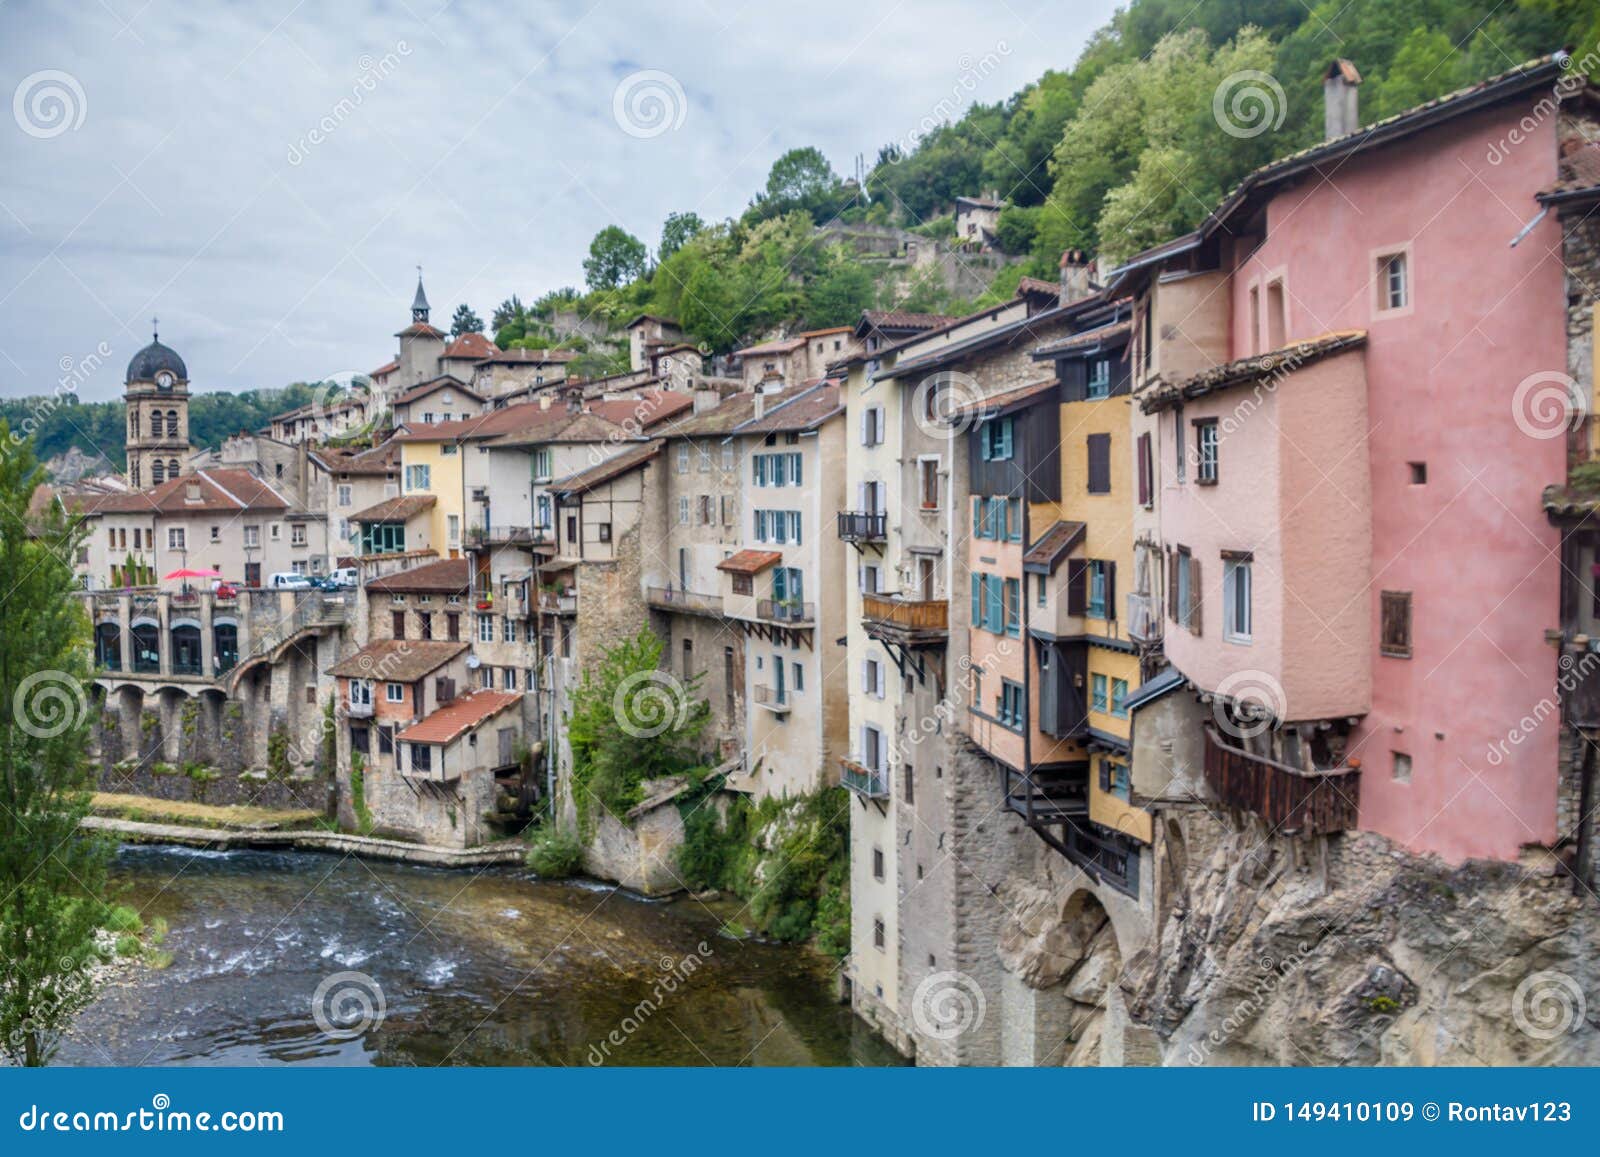 pont-en-royans, a charming picturesque medieval village with it colorful houses overhang the bourne river,